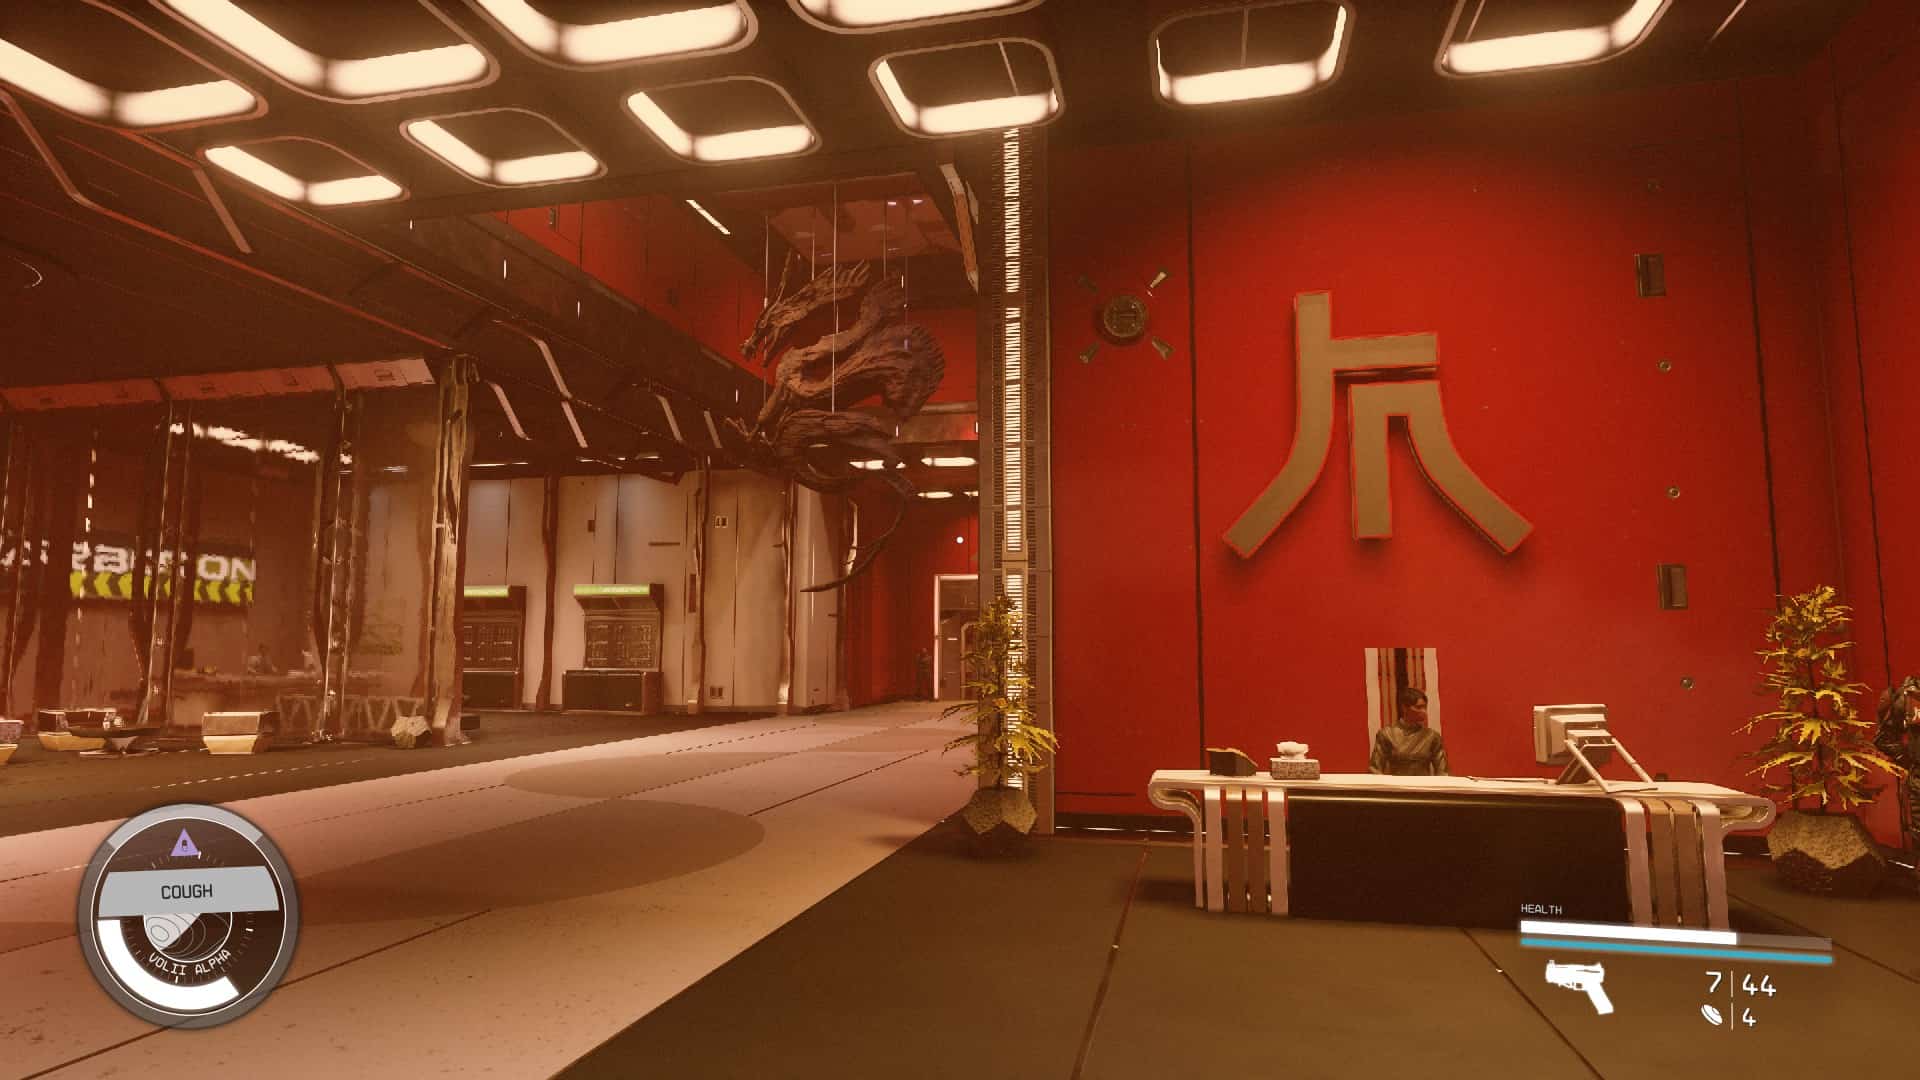 Starfield Ryujin Industries: The lobby of Ryujin Tower showing a desk with a large symbol on the wall behind it, with a corridor leading off to the left.